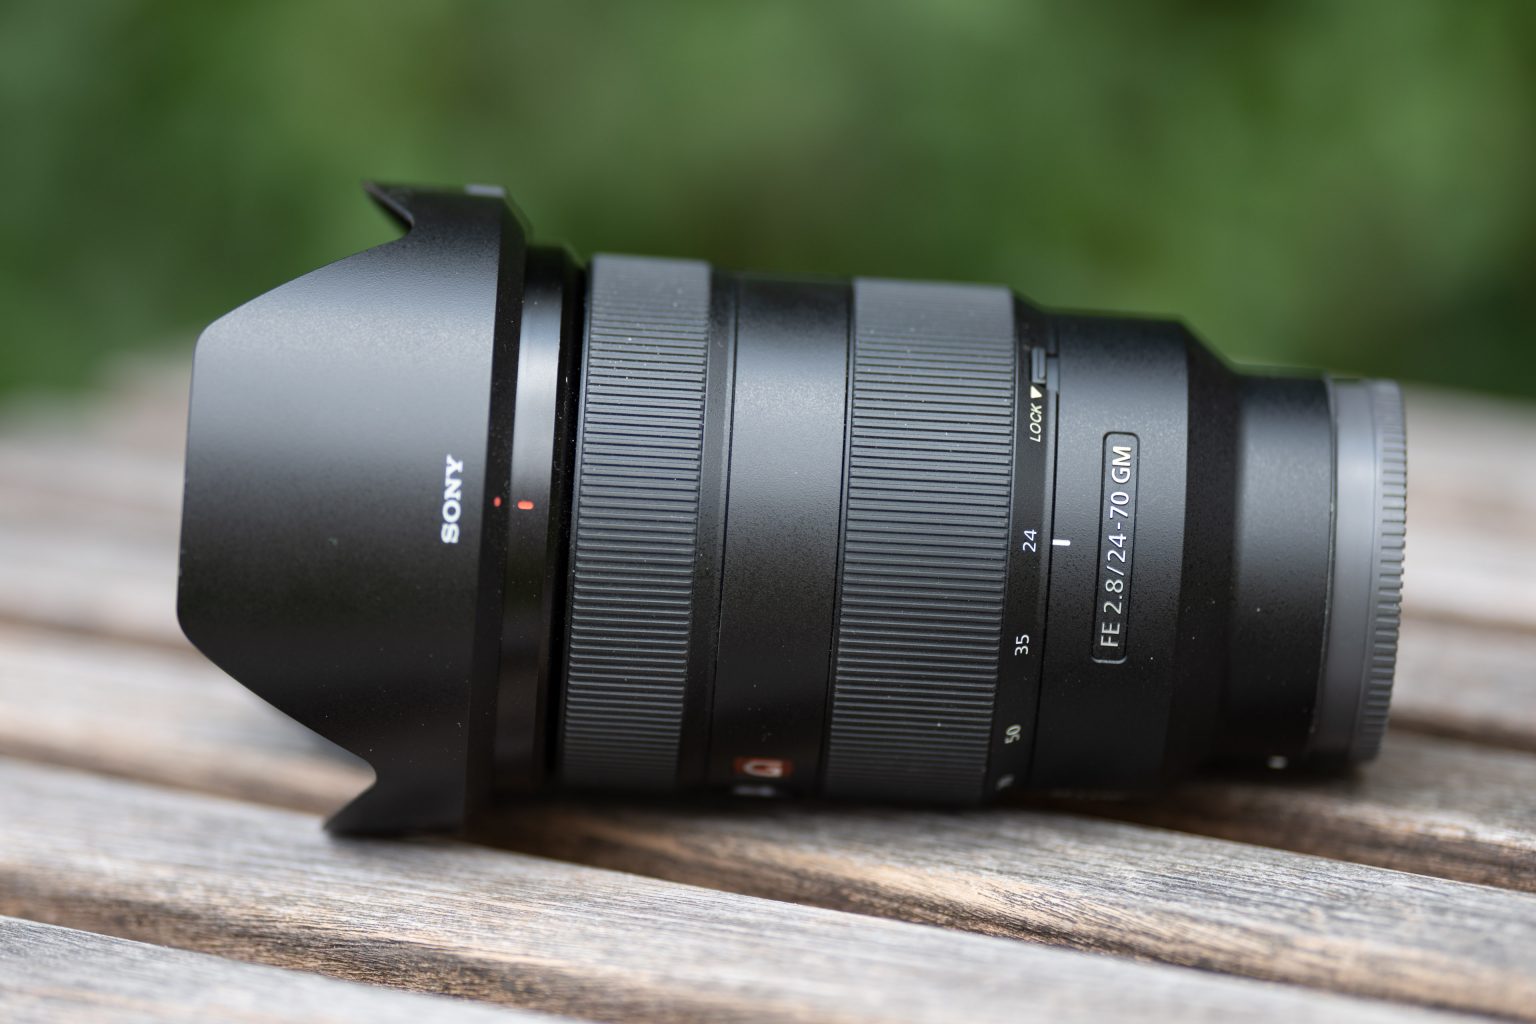 Sony FE 24-70mm f/2.8 GM: Professional zoom lens with high aperture.